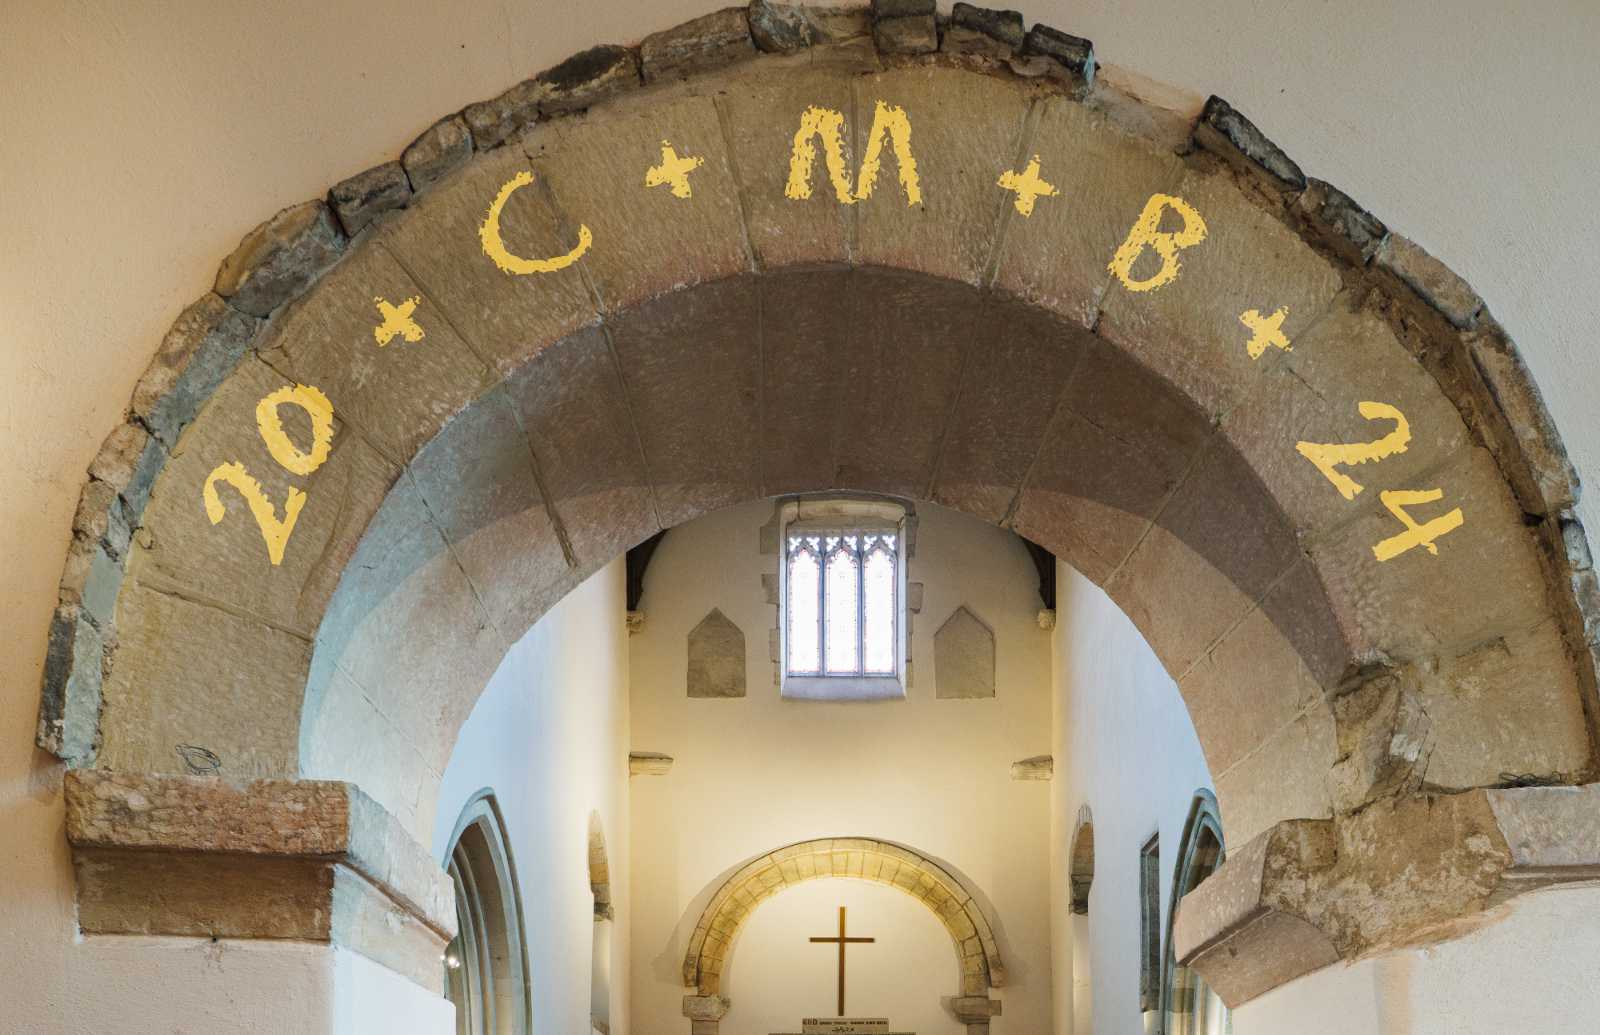 Chalk blessing on an arch inside of a church for Epiphany